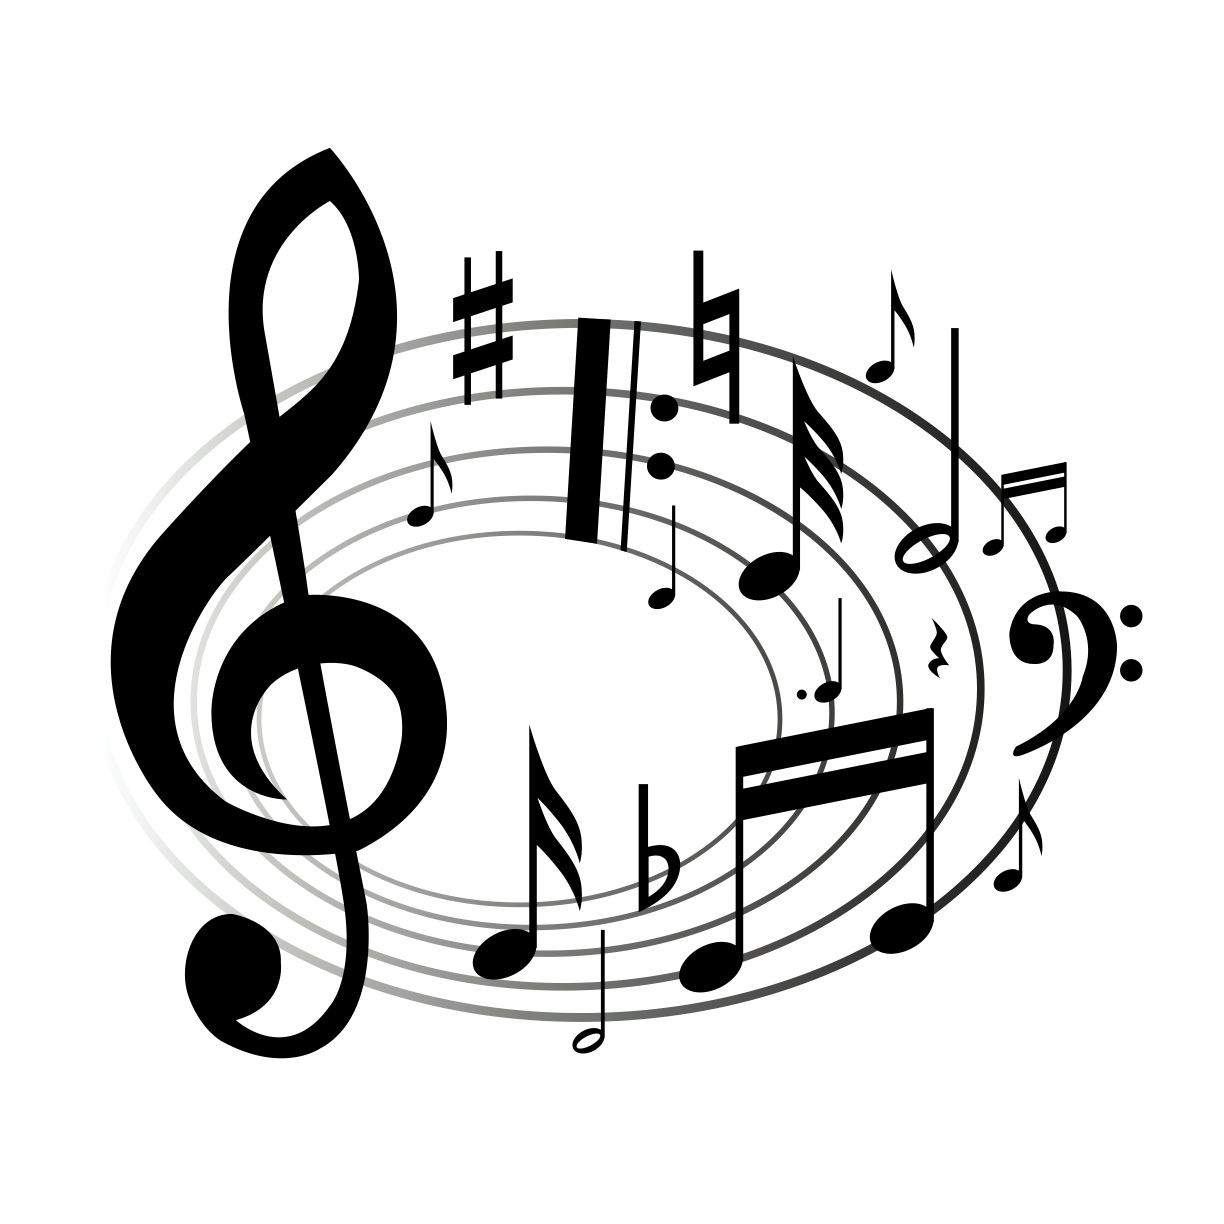 Musical notes coloring pages - Coloring Pages & Pictures - IMAGIXS